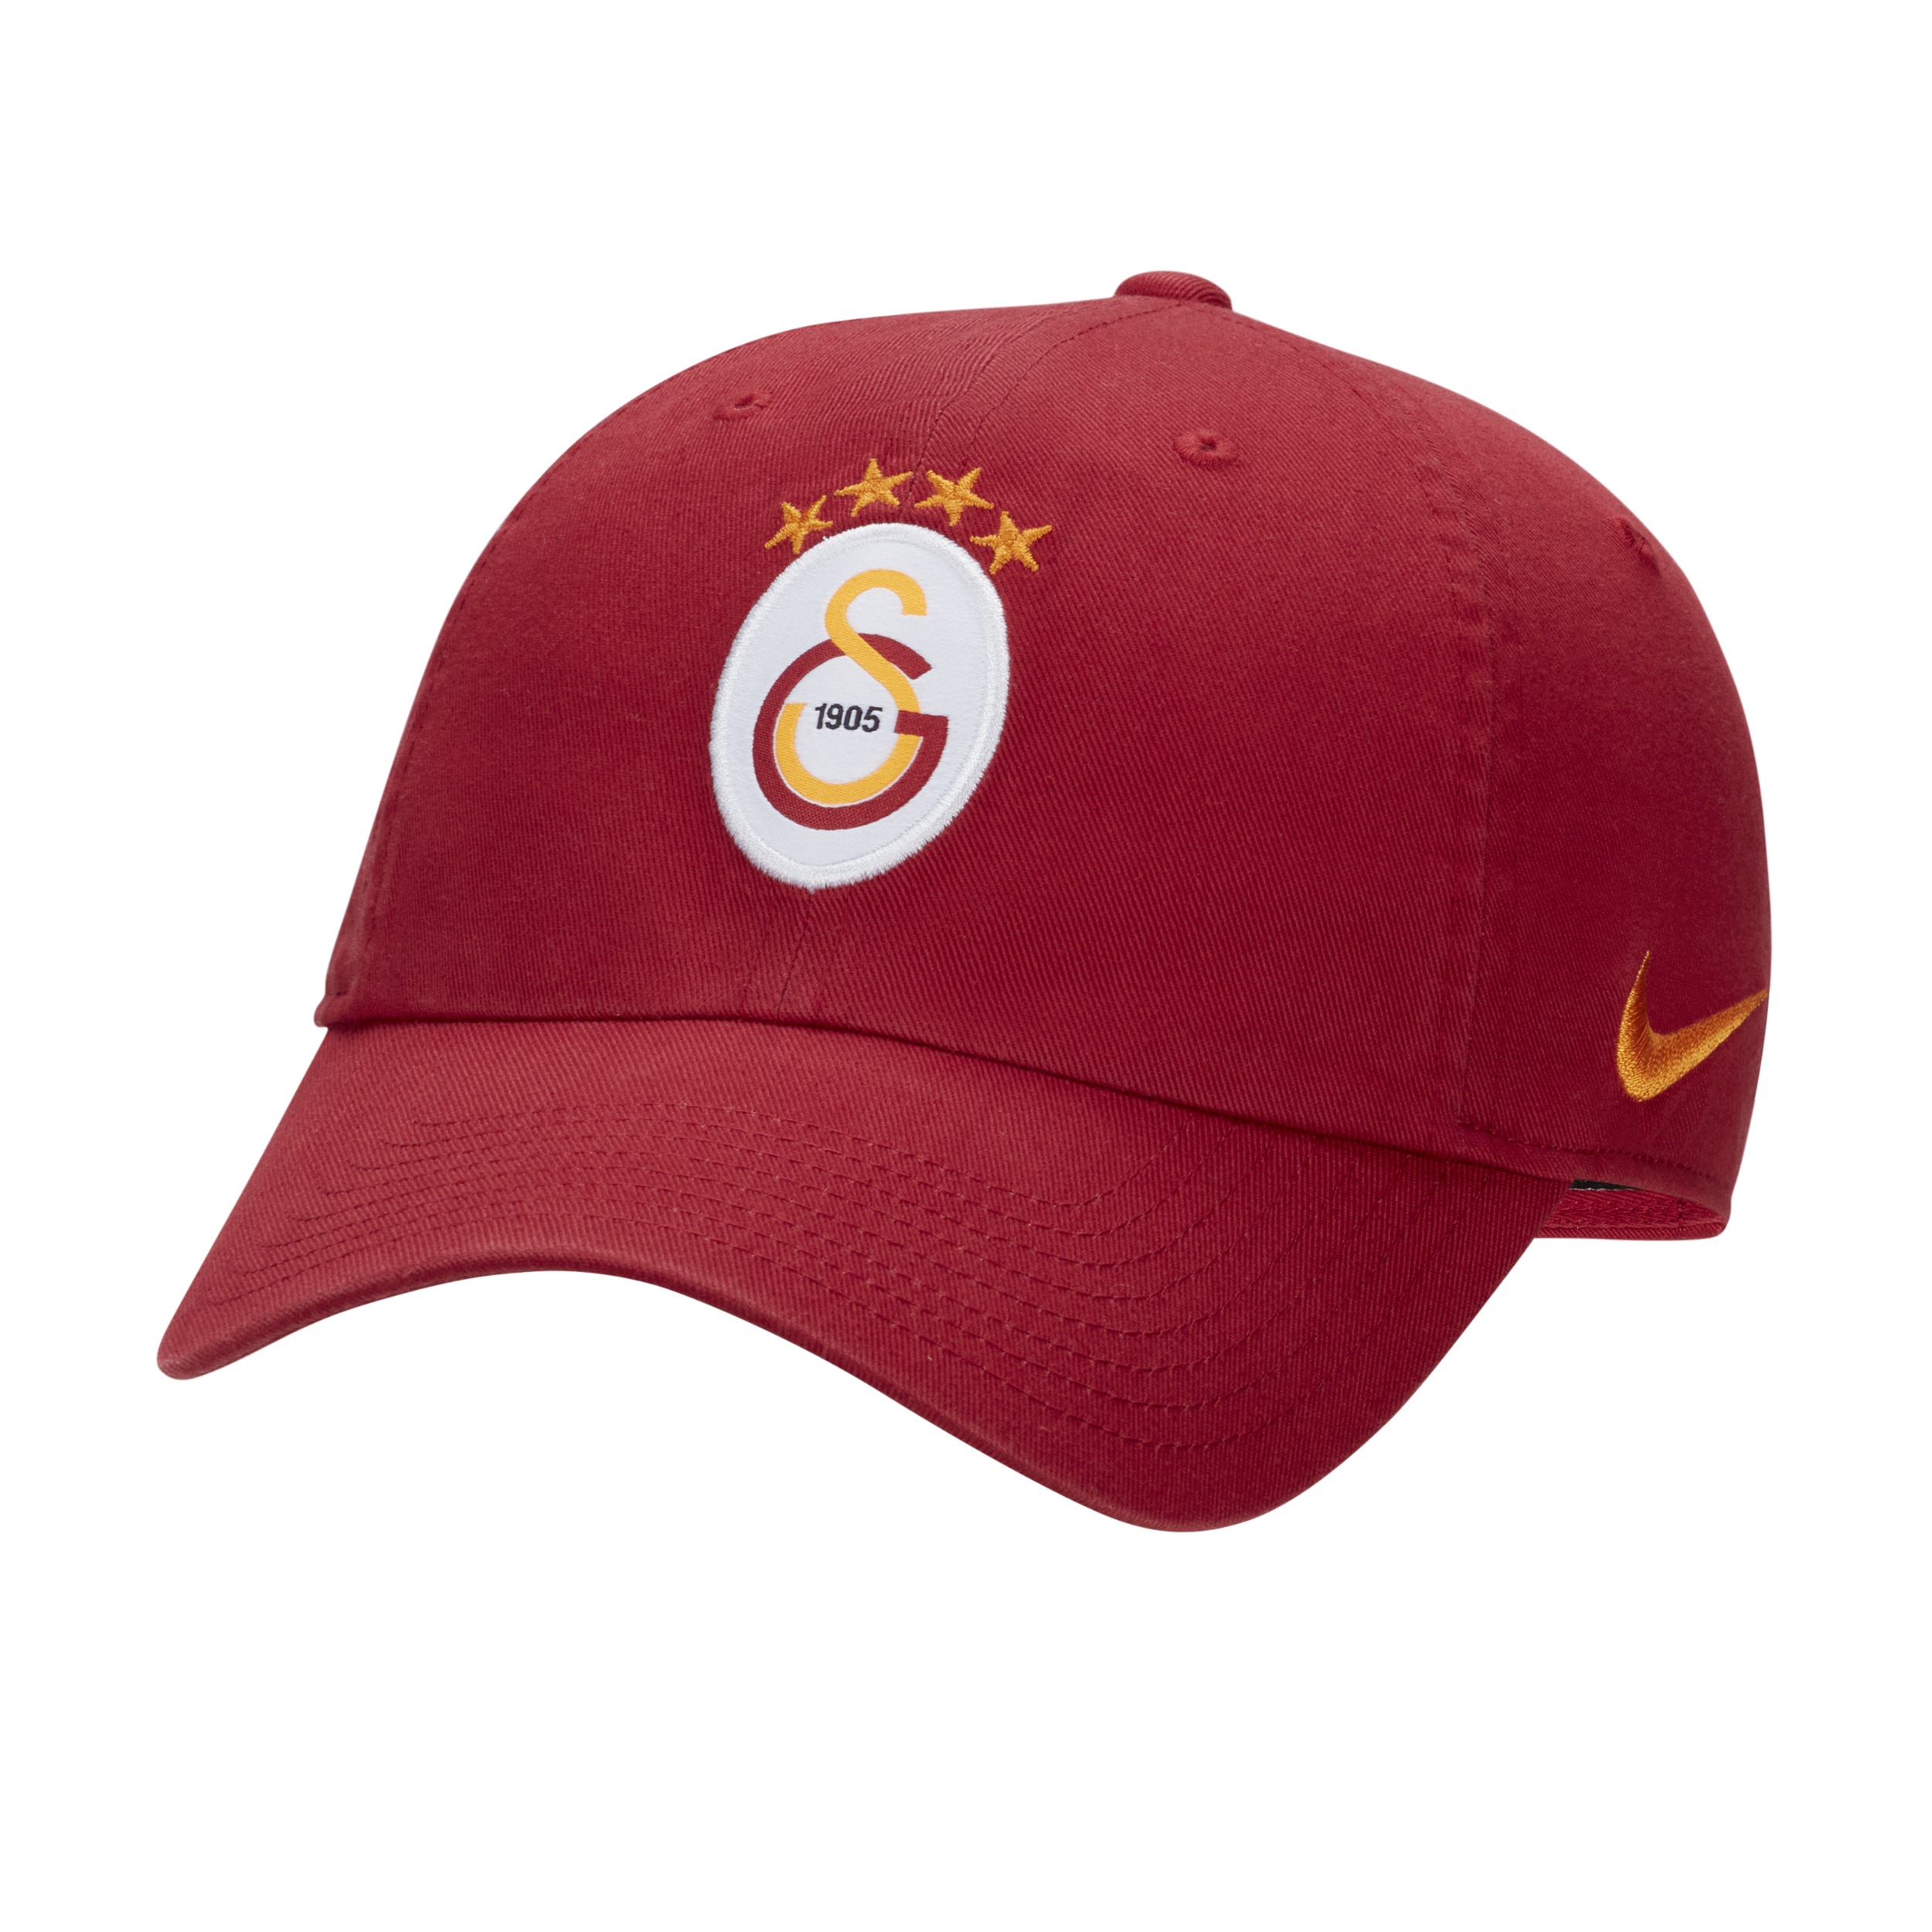 Nike Cappello Galatasaray Heritage86 - Rosso